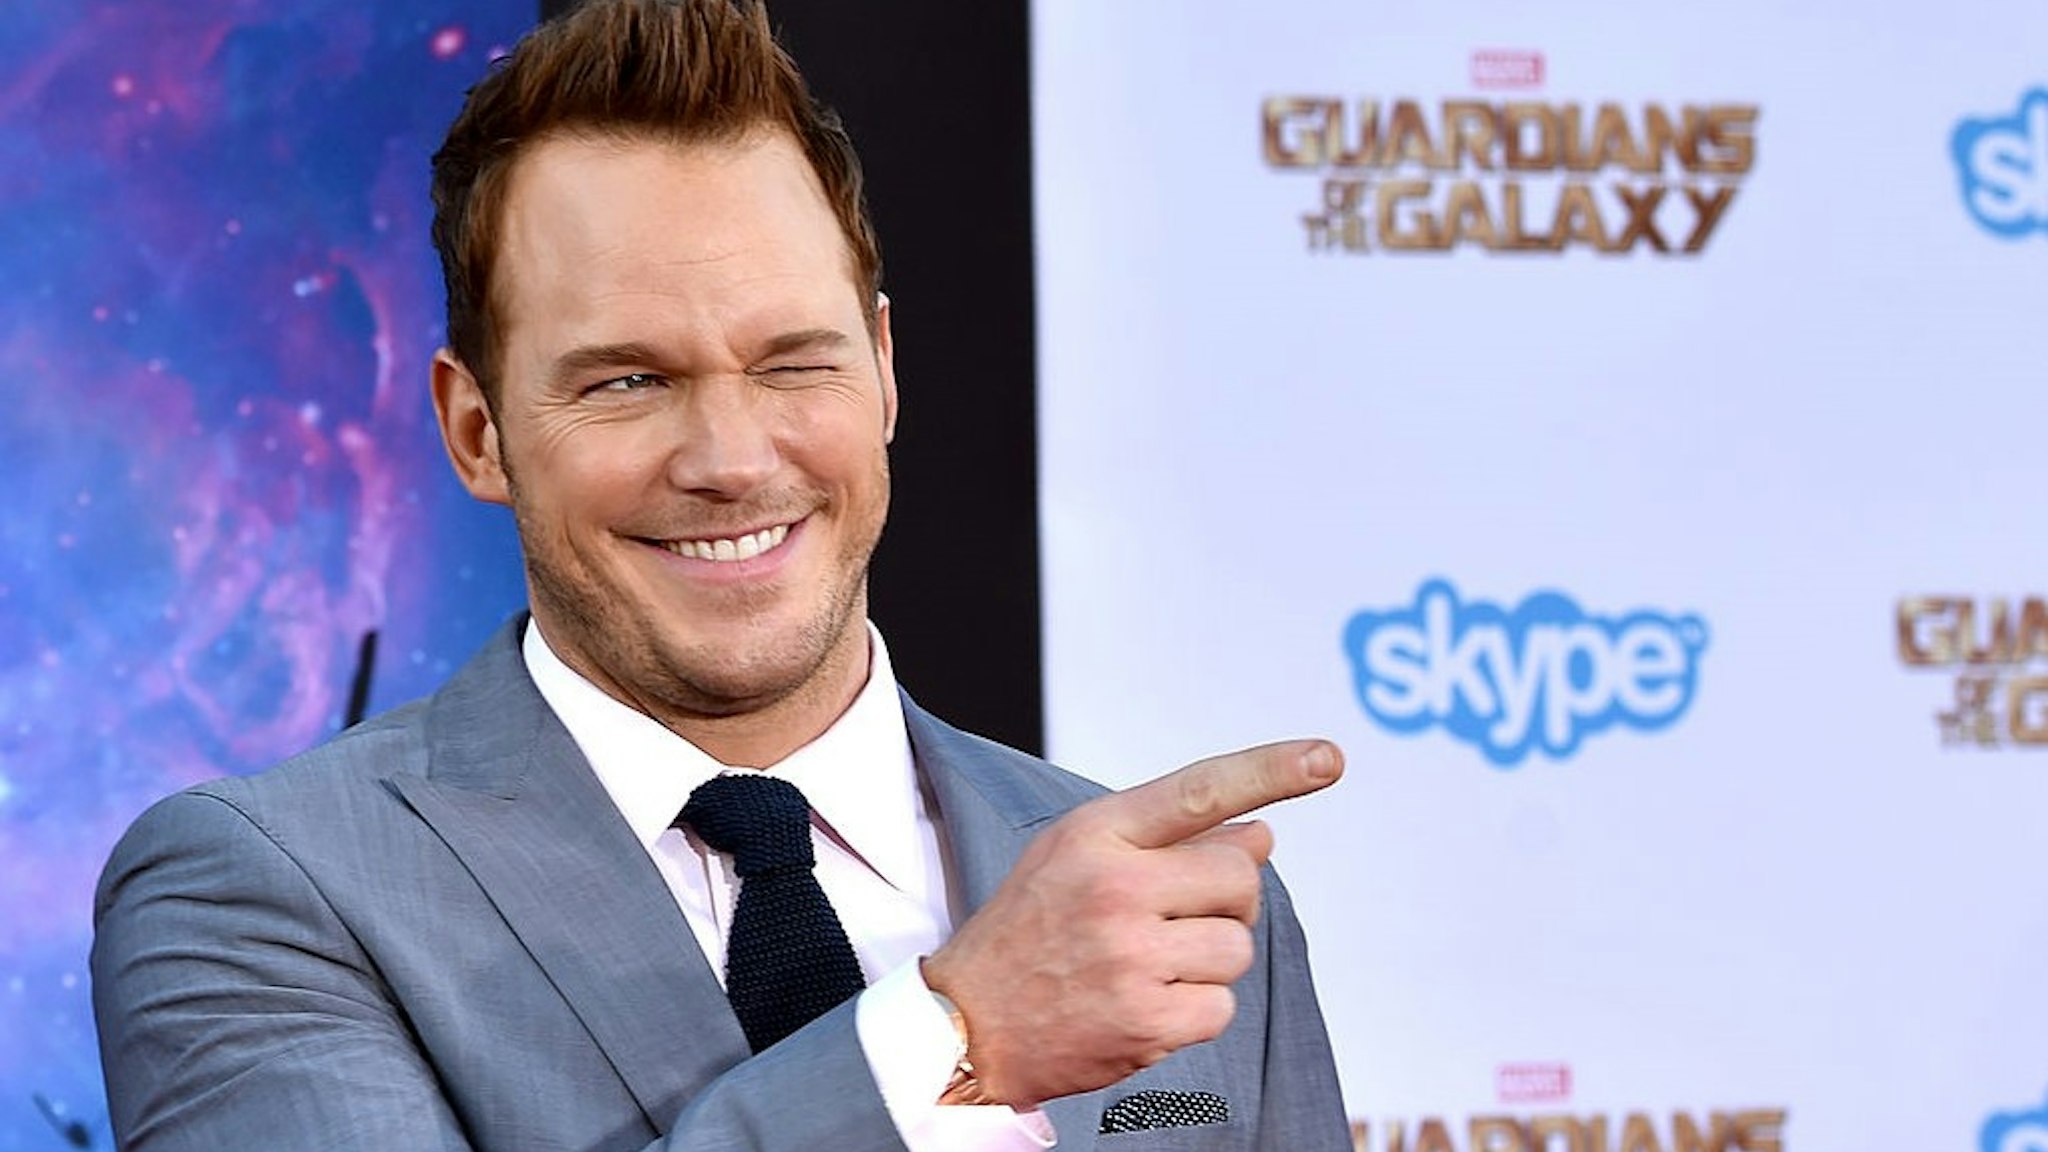 HOLLYWOOD, CA - JULY 21: Actor Chris Pratt attends the premiere of Marvel's "Guardians Of The Galaxy" at the Dolby Theatre on July 21, 2014 in Hollywood, California. (Photo by